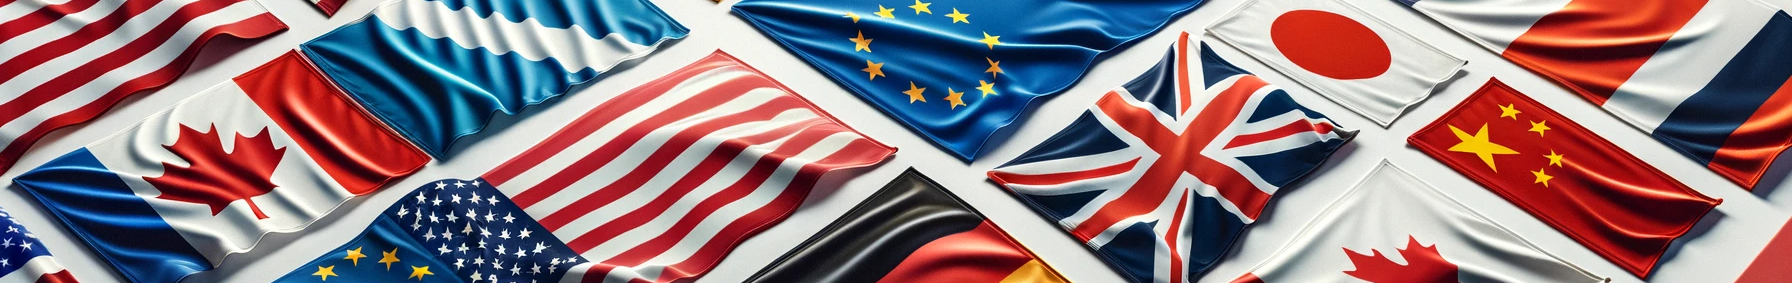 flags of the USA, Germany, European Union, Canada, Japan, C